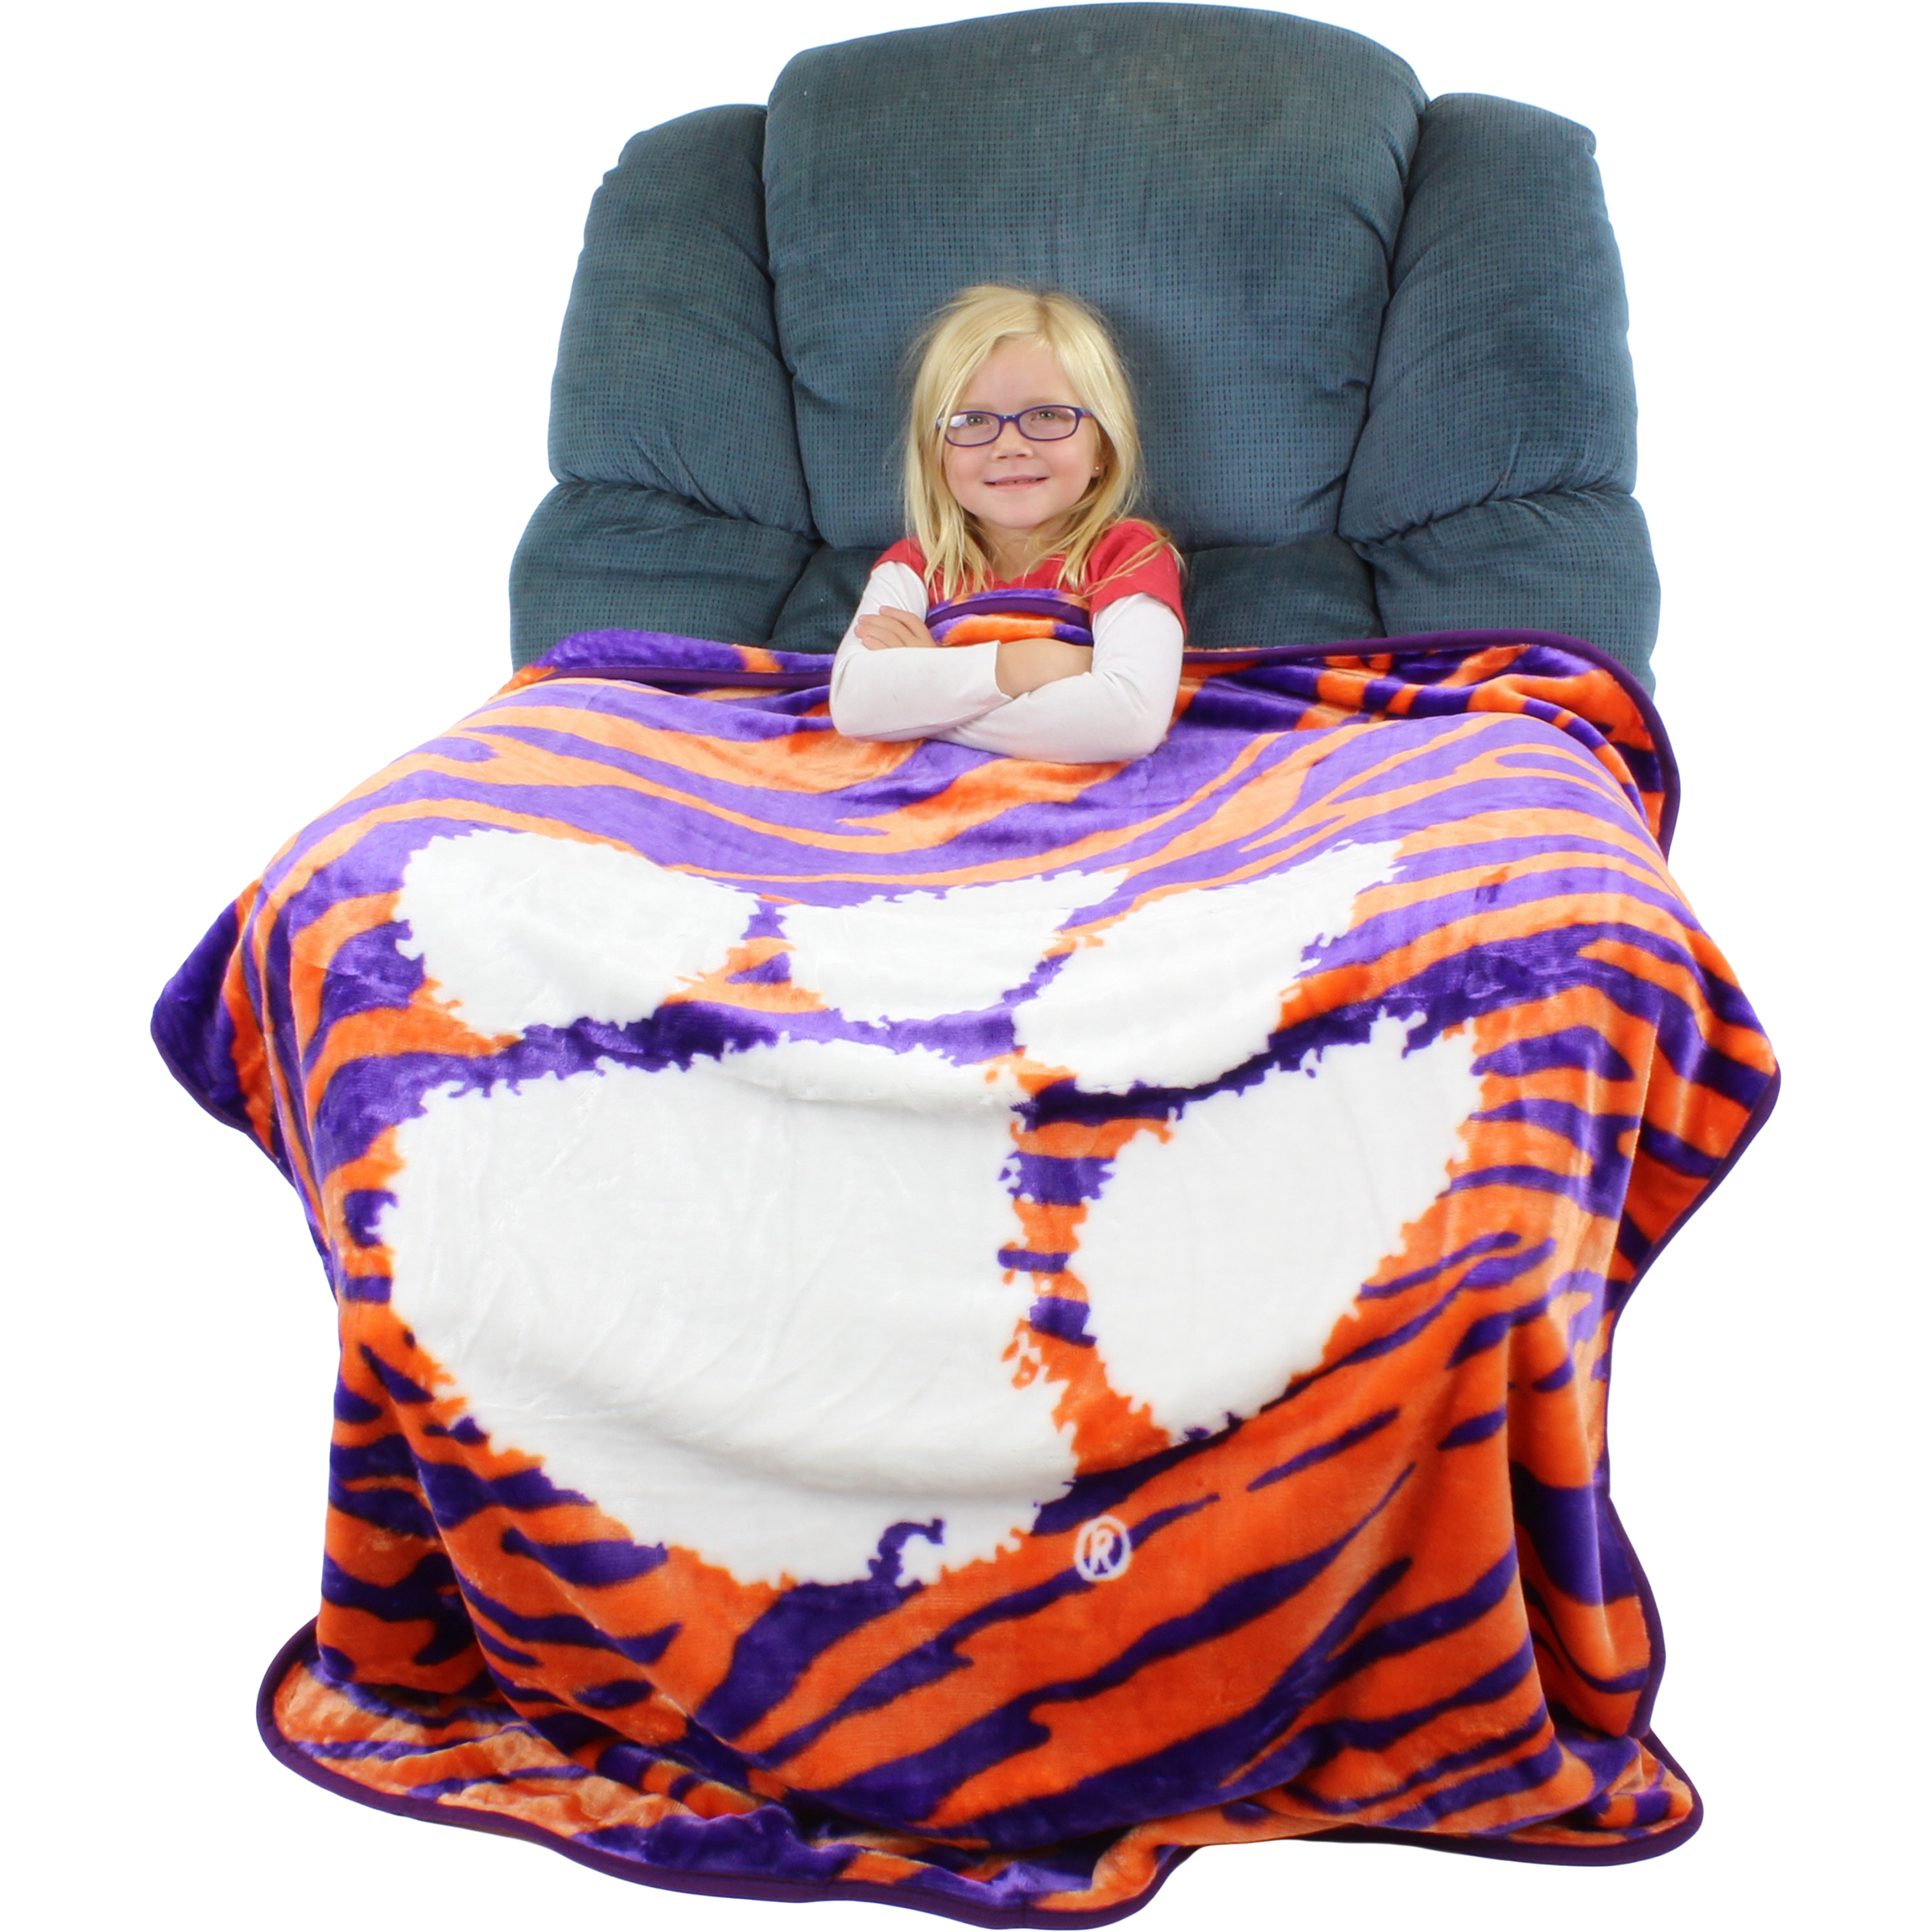 College Covers Everything Comfy Clemson Tigers Soft Raschel Throw Blanket, 60" x 50" - image 2 of 8